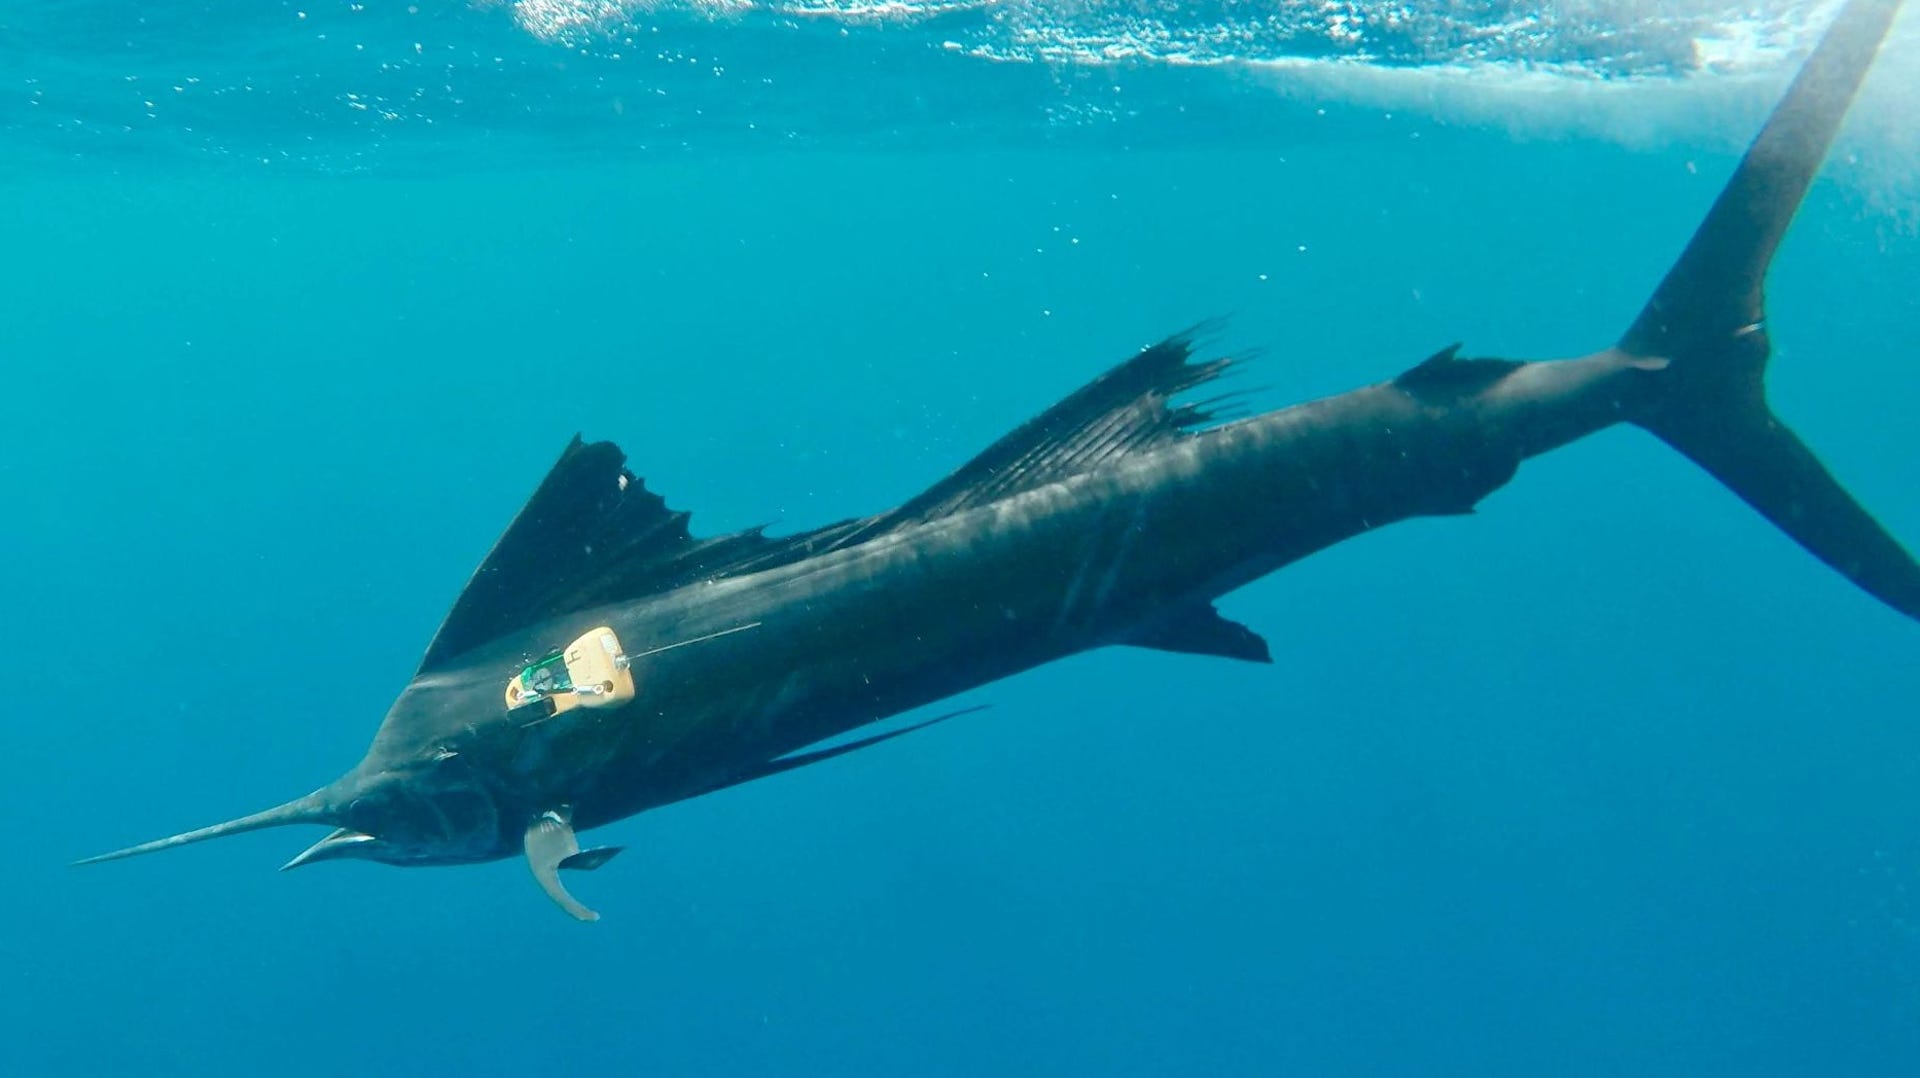 Blue ocean water with a long, gray sailfish with pointy nose and wide fins. It's wearing a camera and sensor package on its side behind its head.